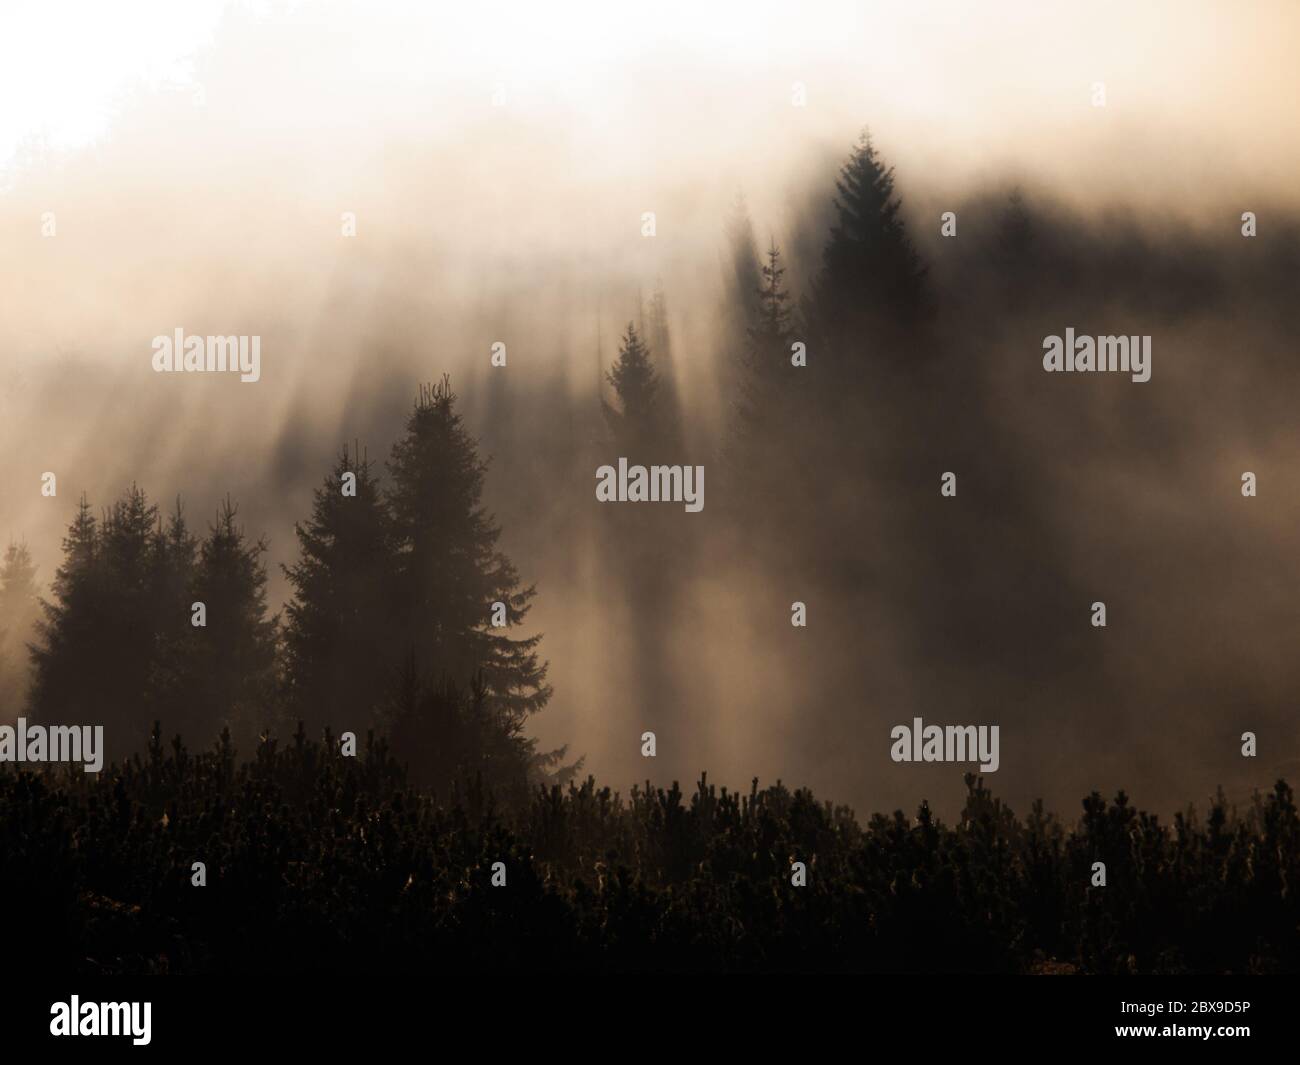 Rays of sunlight penetrate morning fog in the forest. Stock Photo